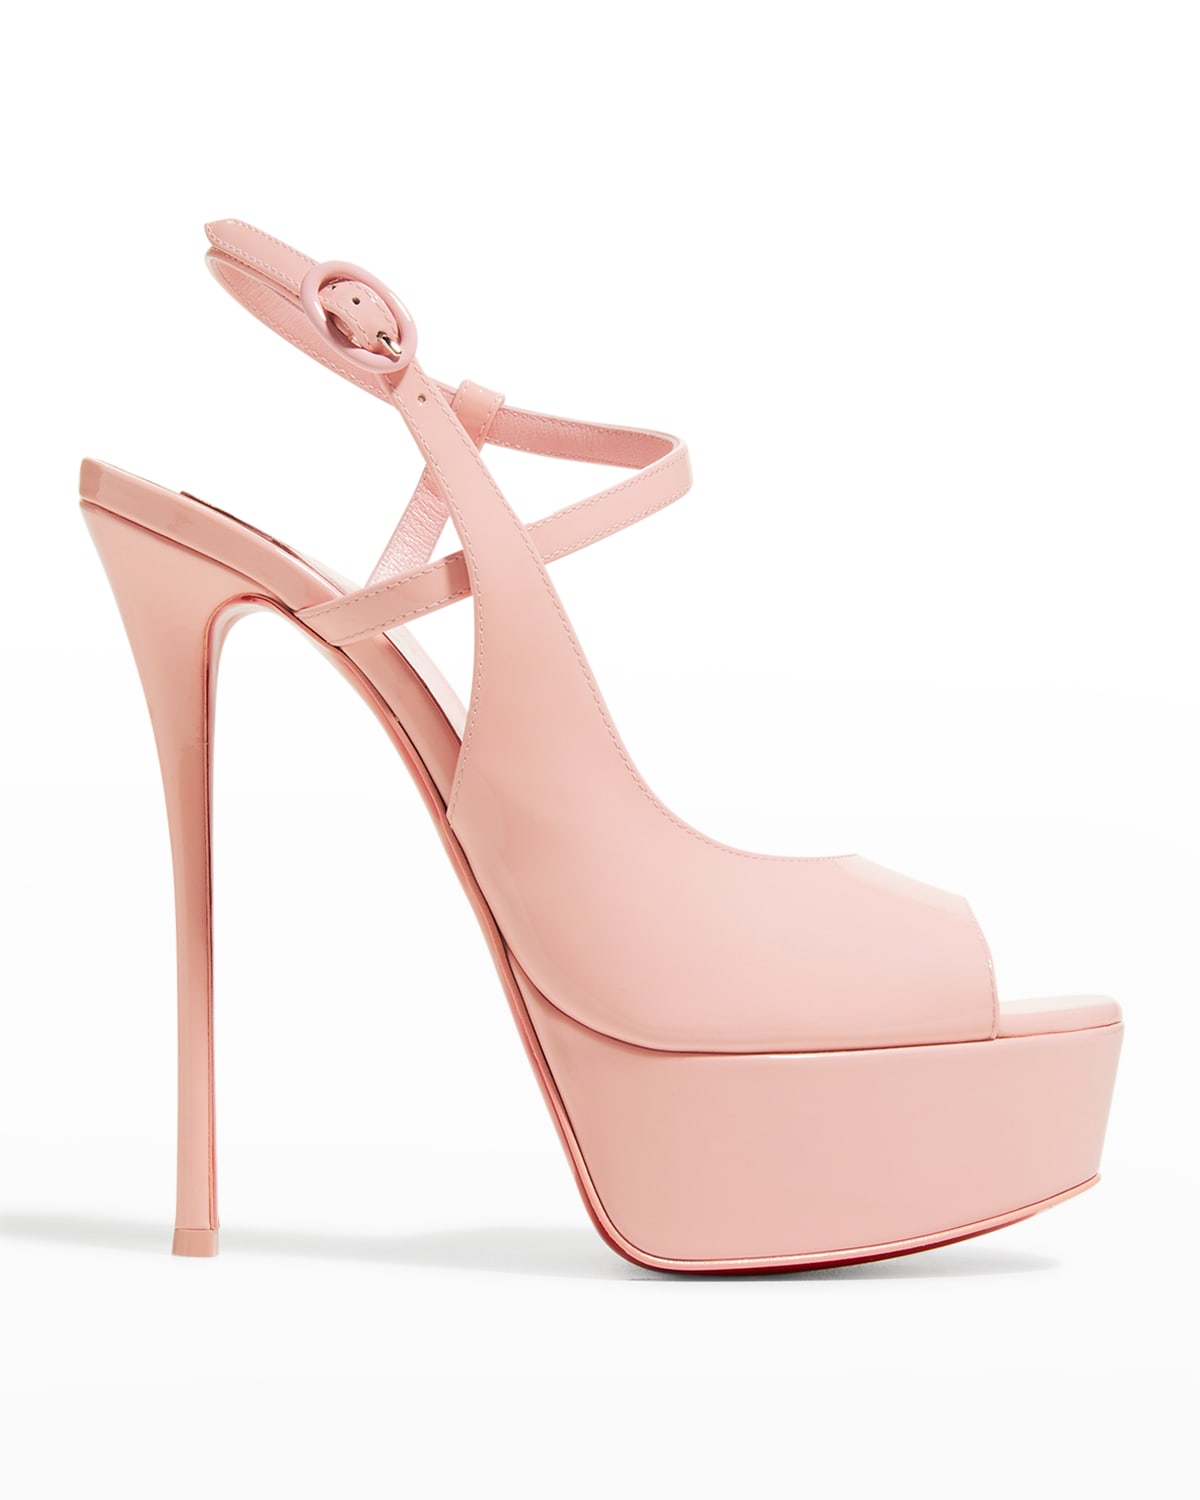 Christian Louboutin So Jenlove Patent Asymmetrical Red Sole Sandals In Light Pink